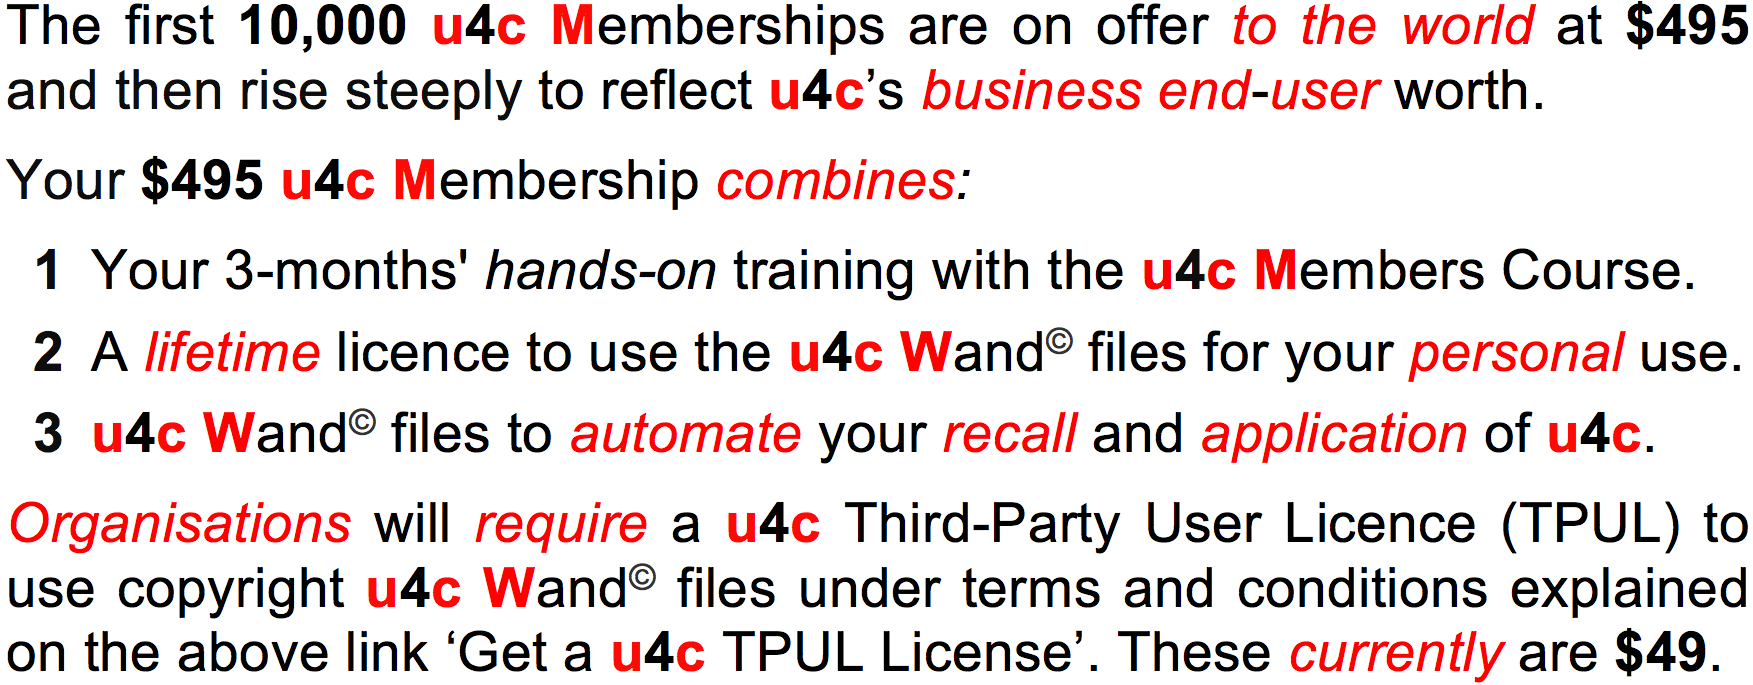 uW24D Become a u4c Member Lower page 2 050422